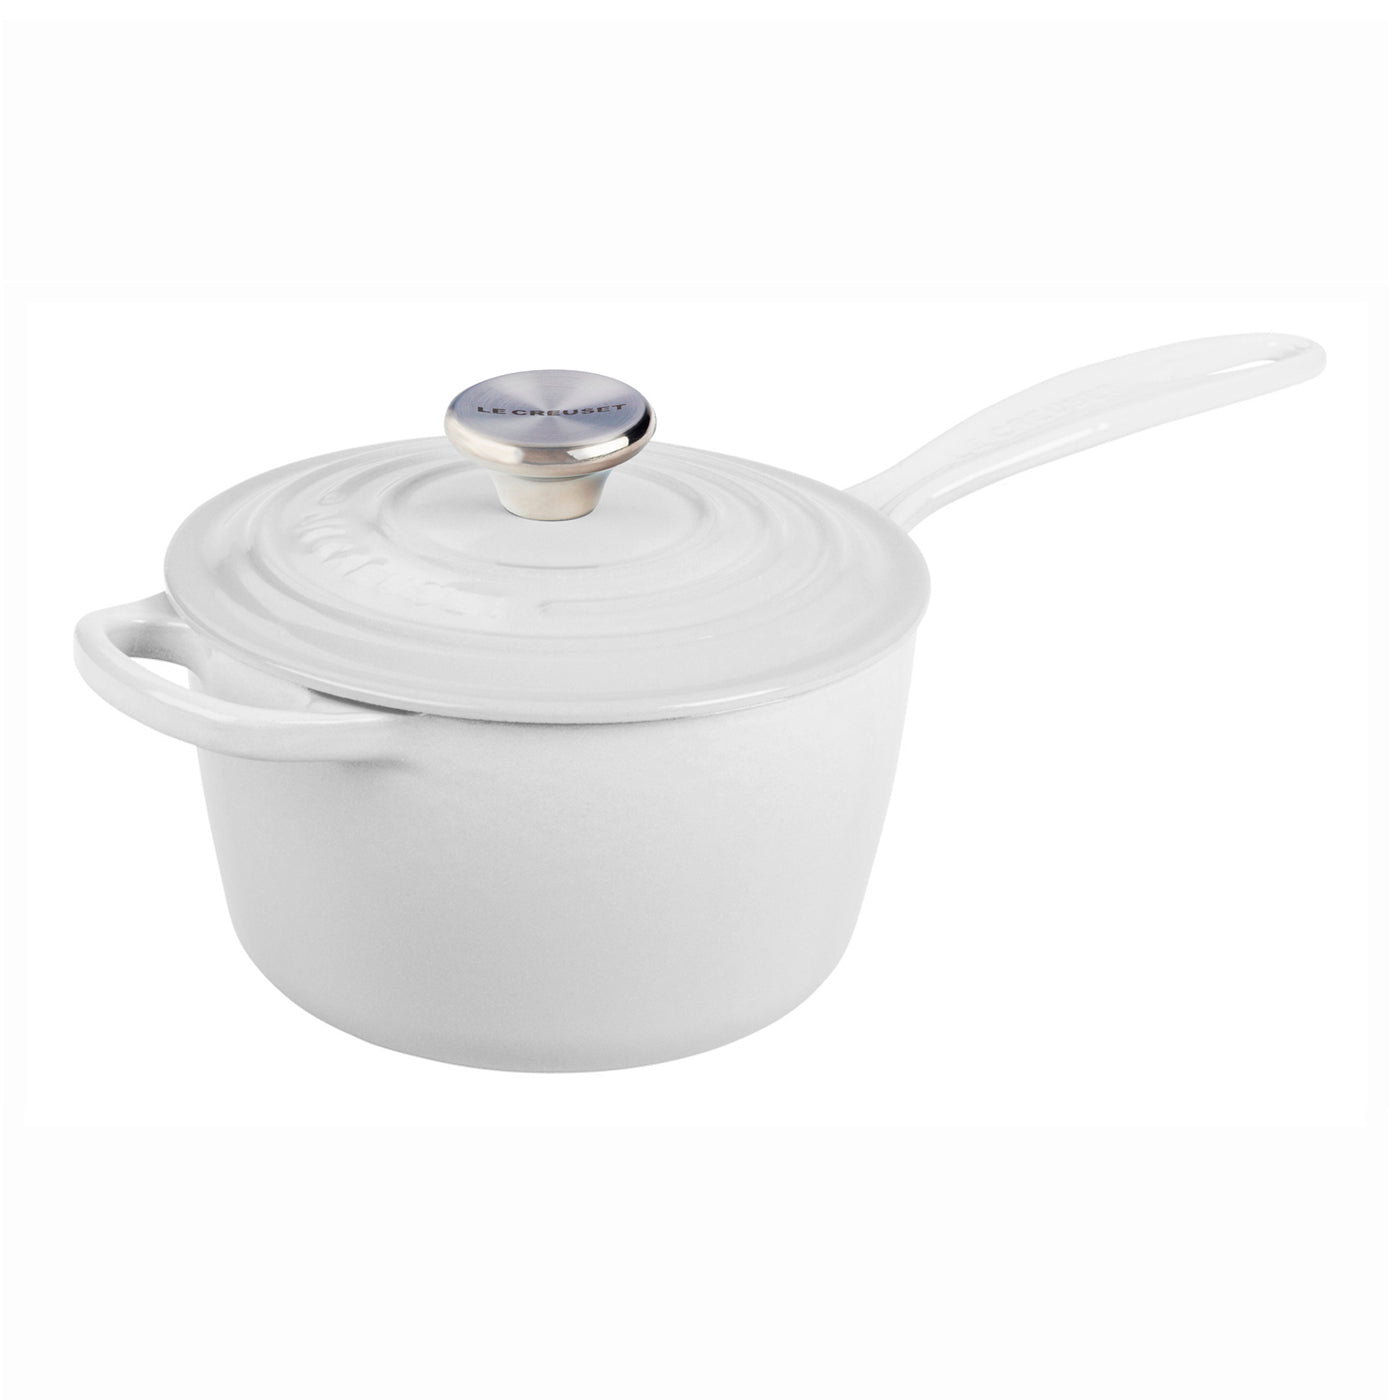 Le Creuset 3 qt. Saucepan with Lid - Stainless Steel